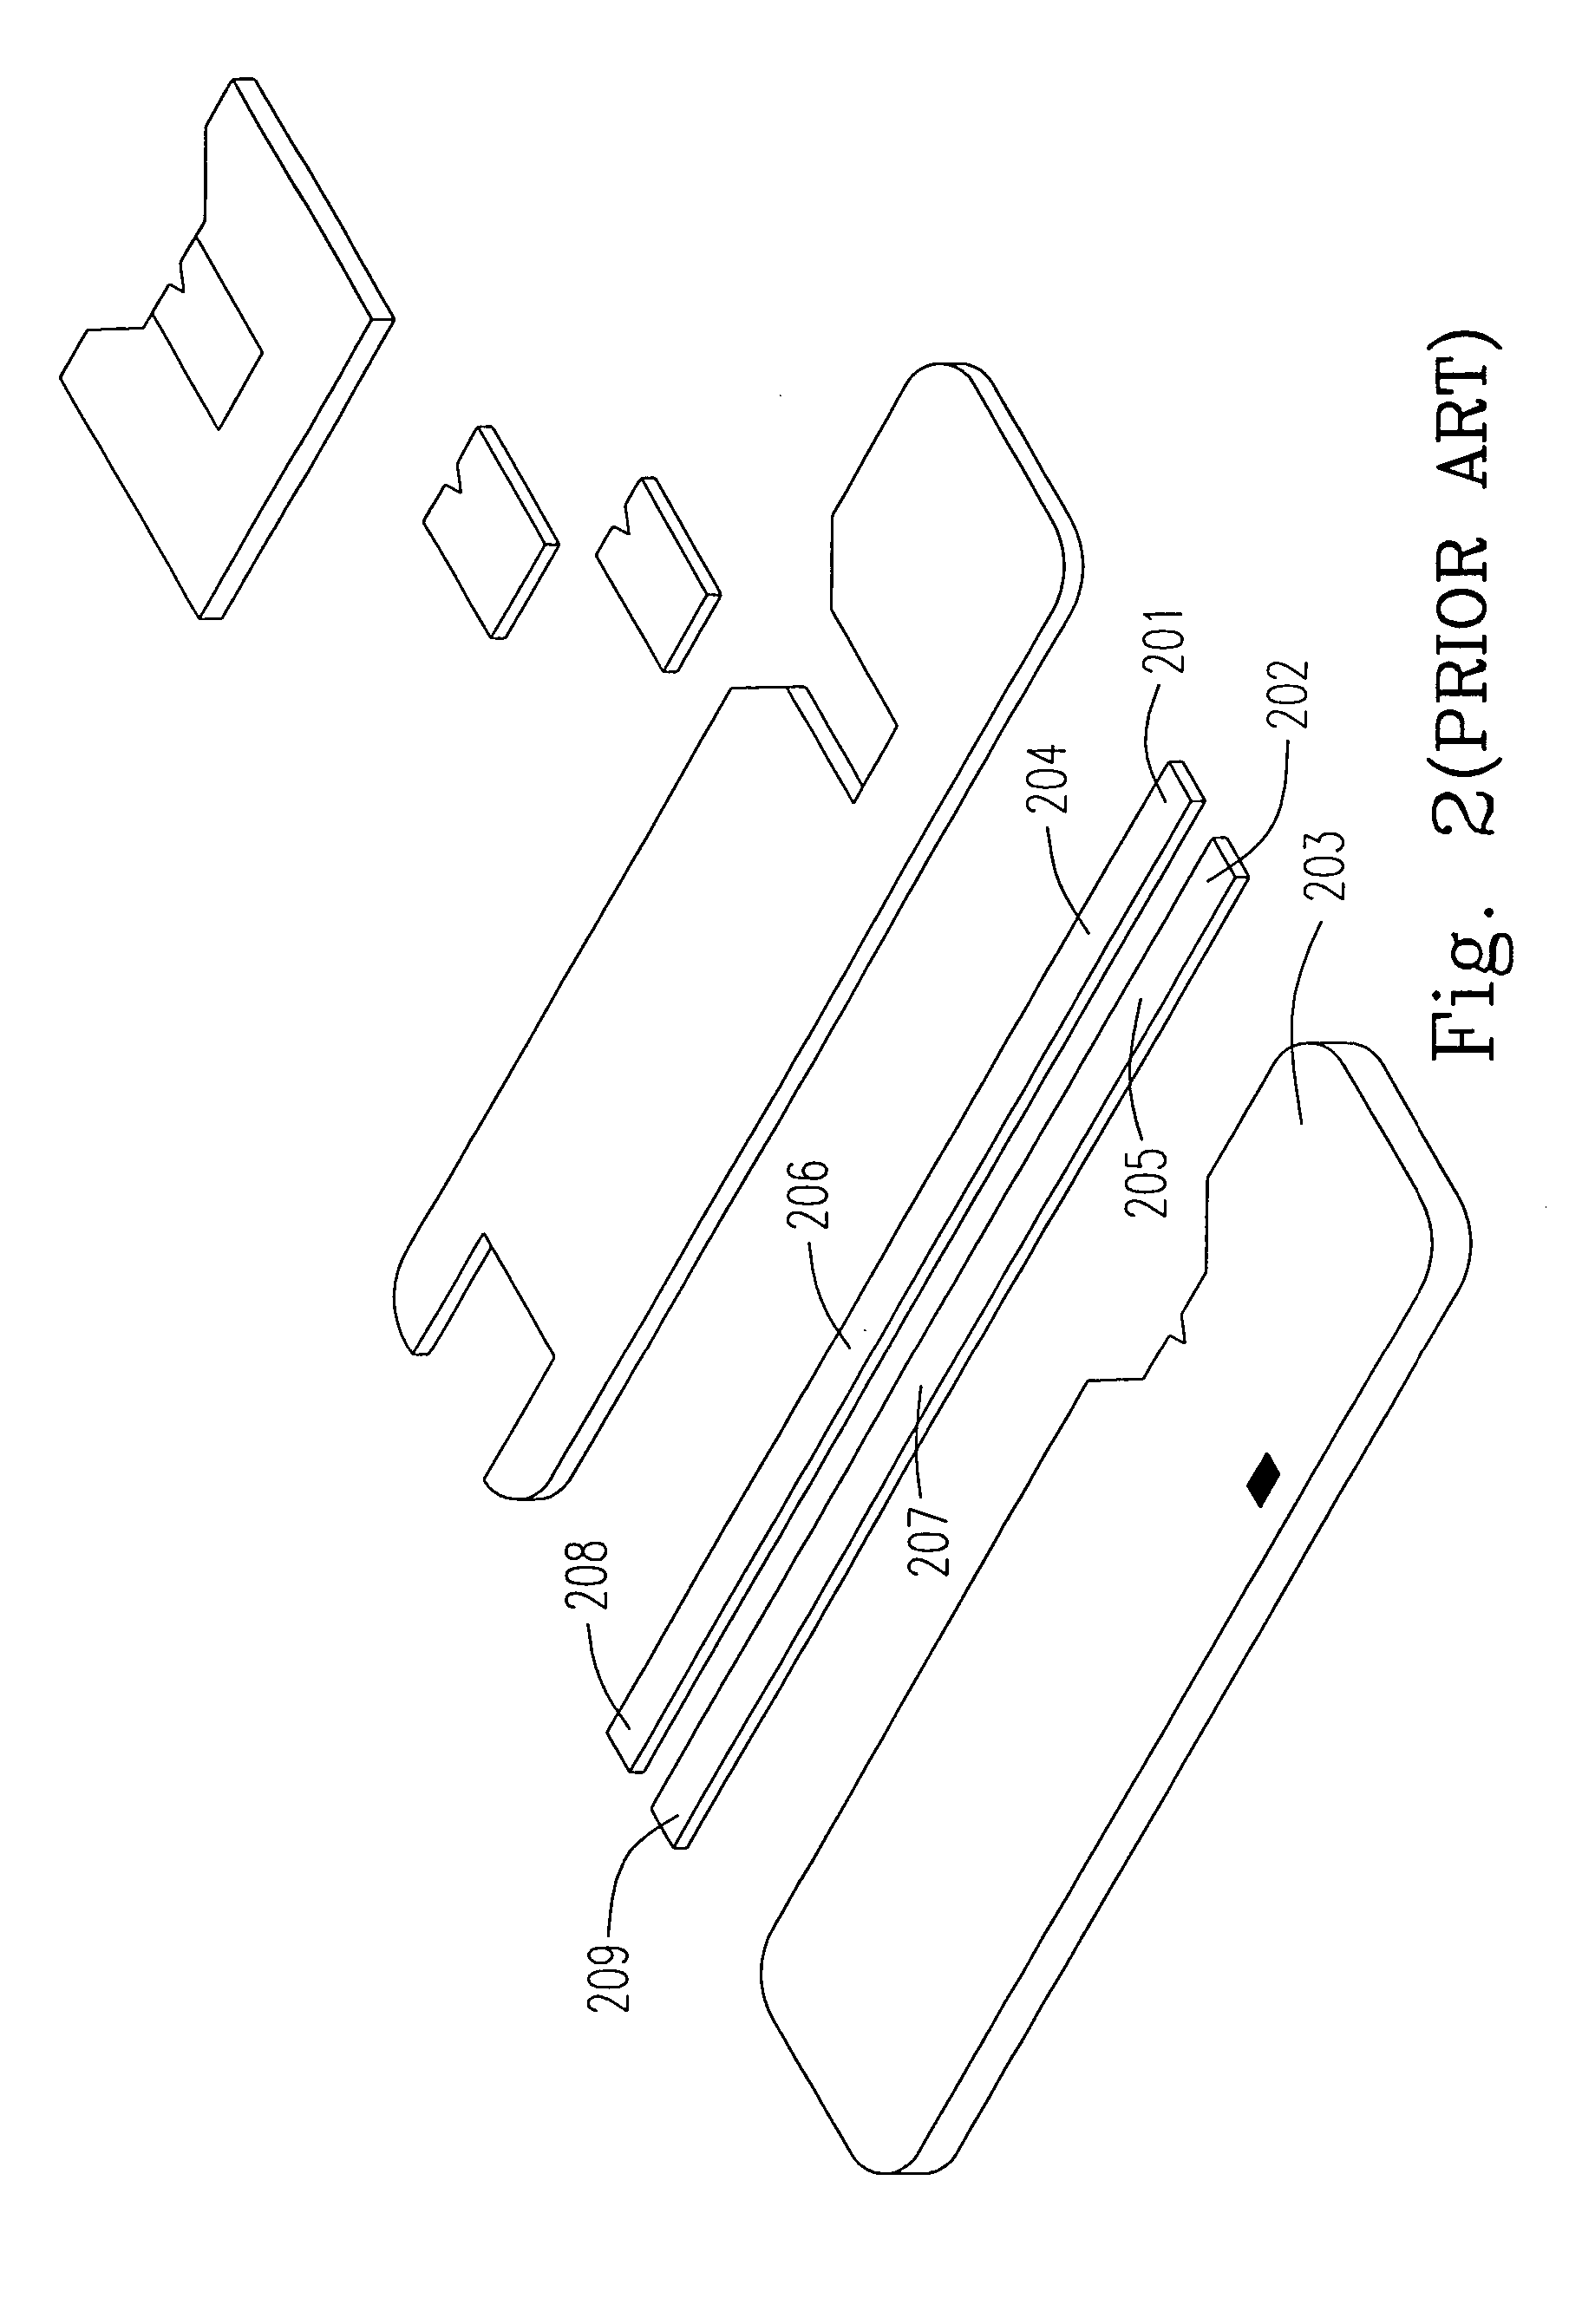 Structure and manufacturing method of disposable electrochemical sensor strip